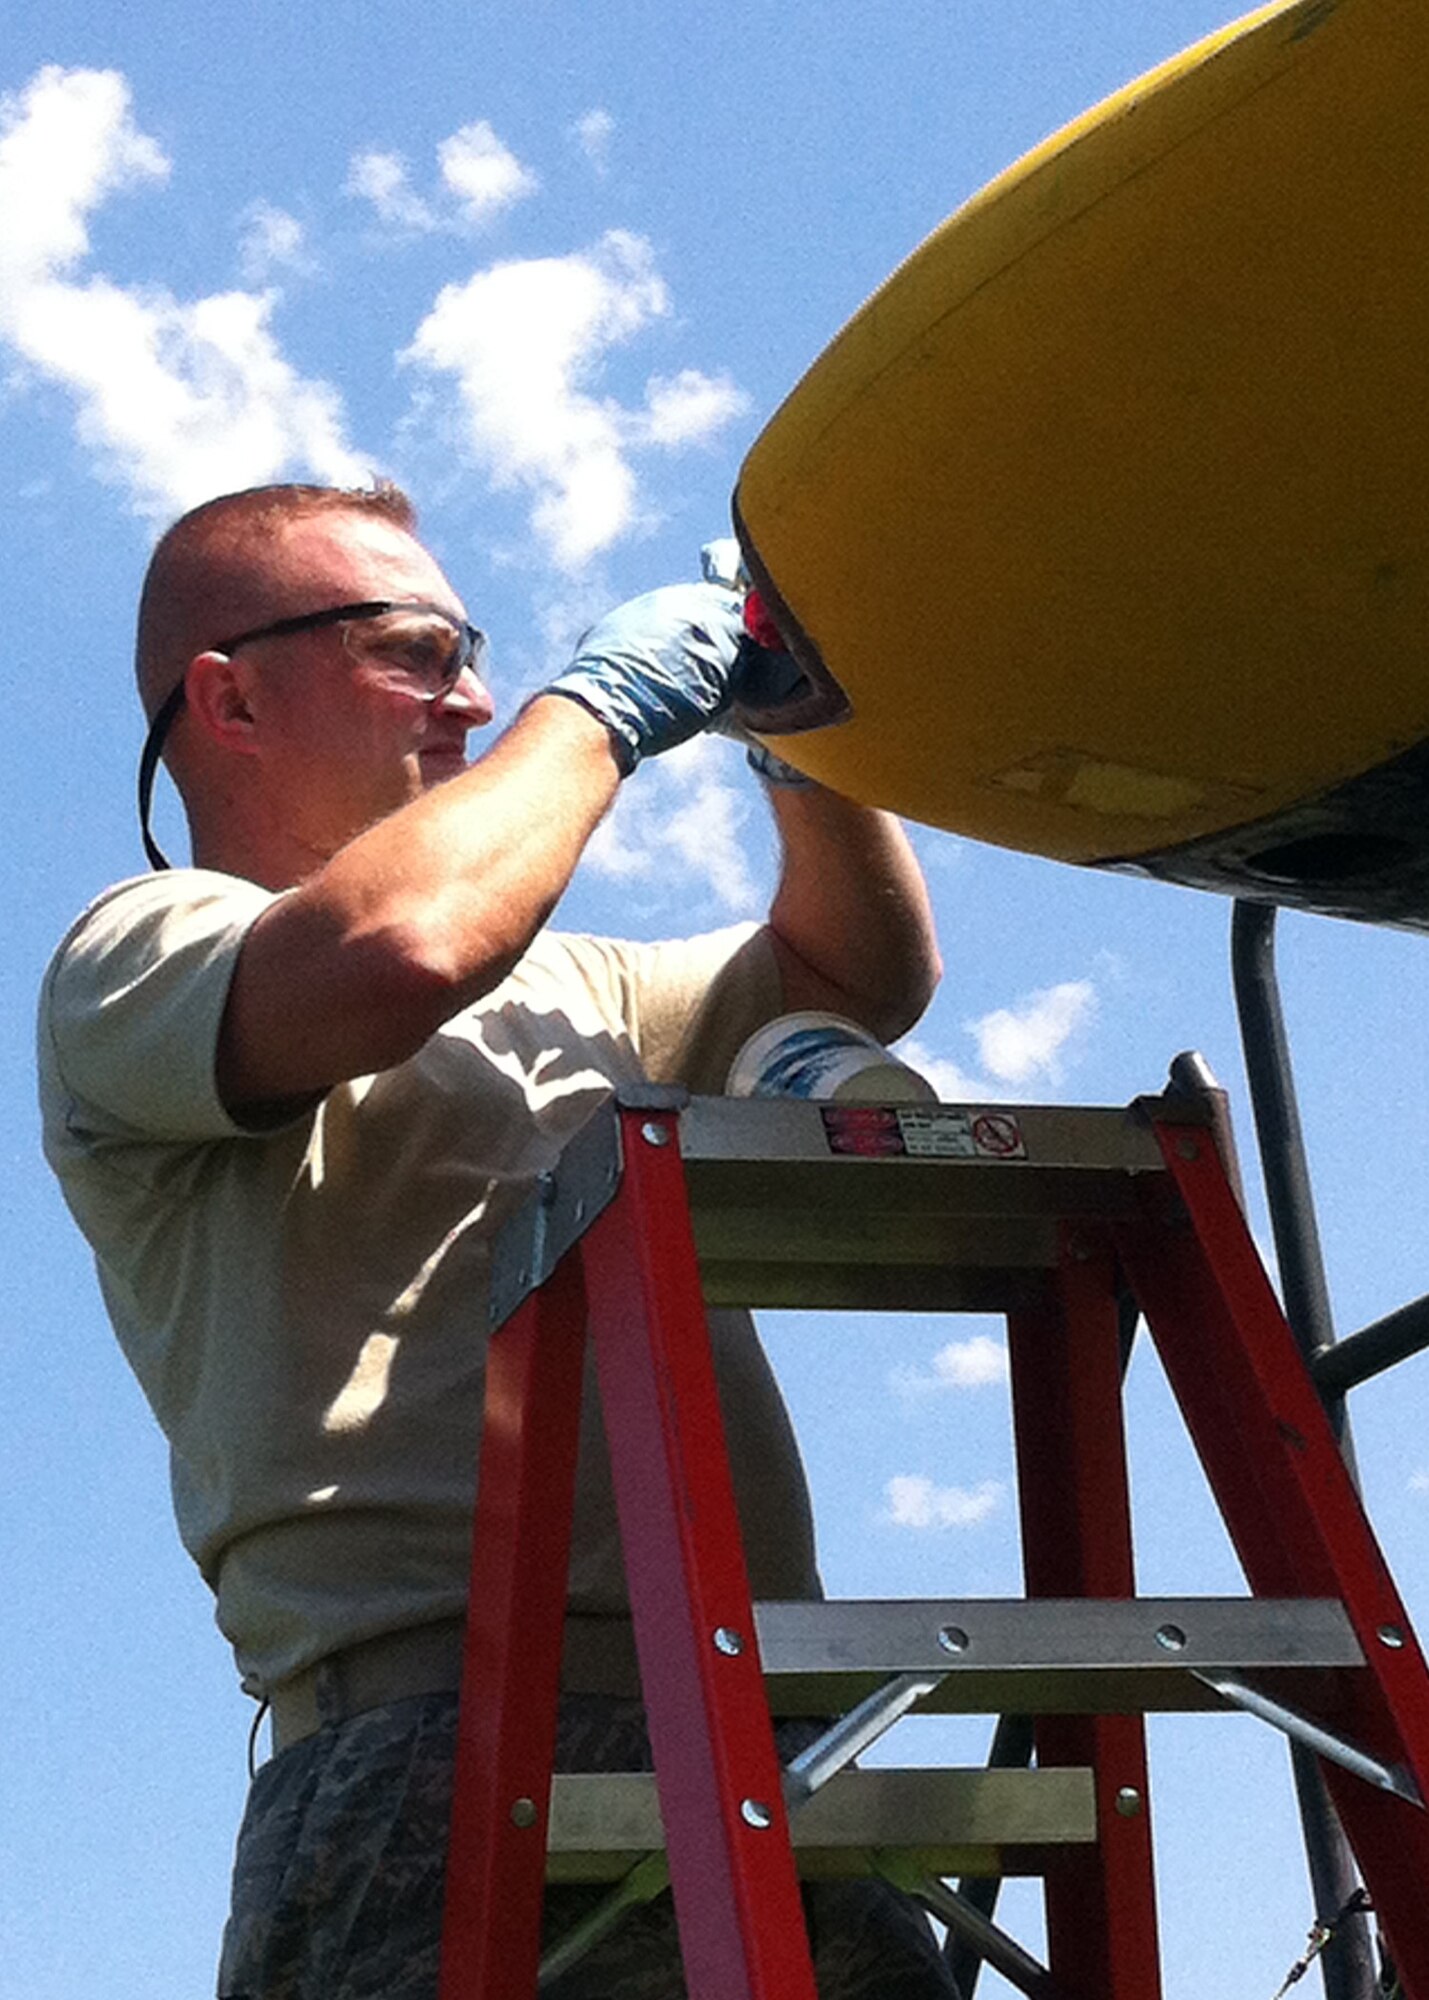 Master Sgt. Rodney Martin, 92nd Air Refueling Wing Historical Property Custodian, demonstrates a fiberglass repair of the left wingtip. (Courtesy Photo)